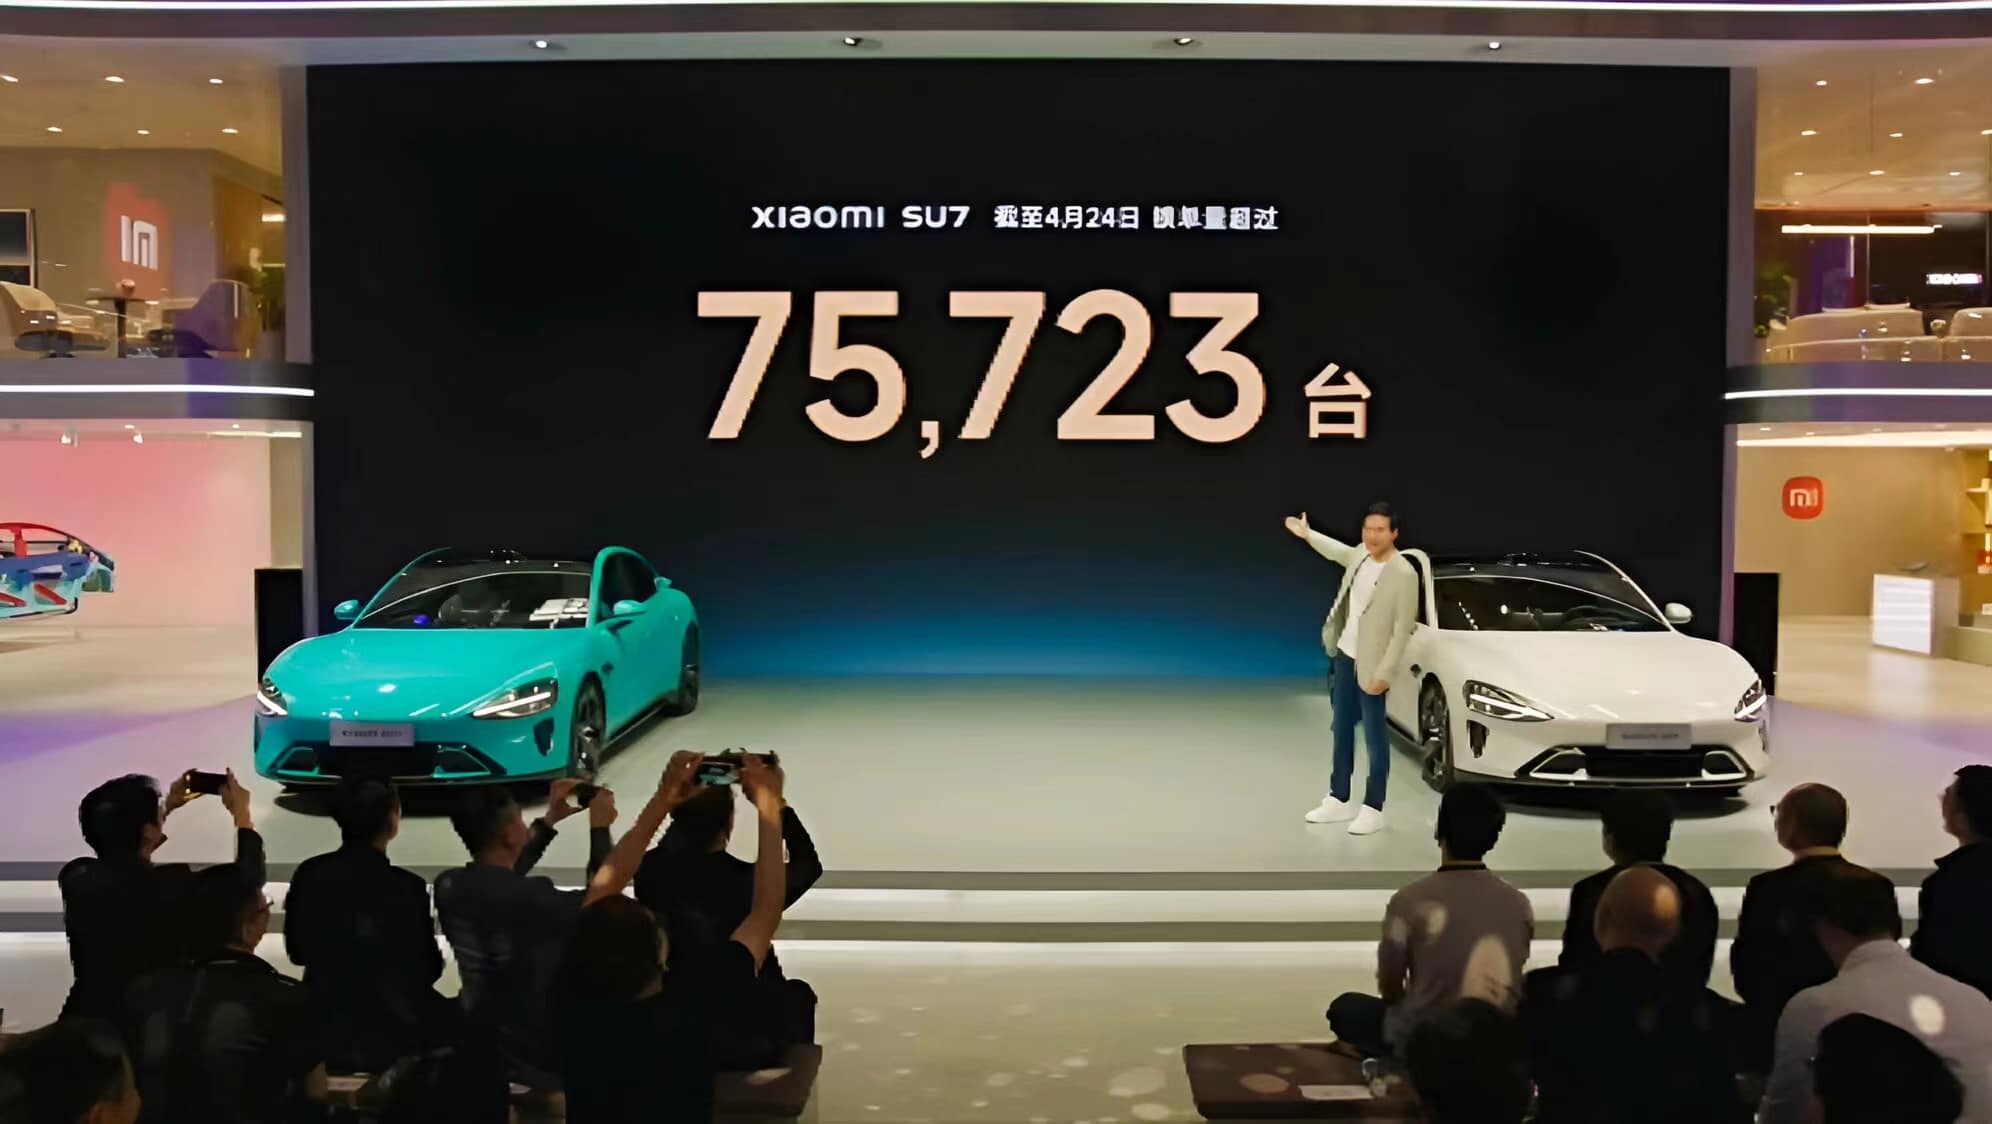 Xiaomi SU7 sold 75,723 units 28 days after its initial launch (2024 Beijing Auto Show)